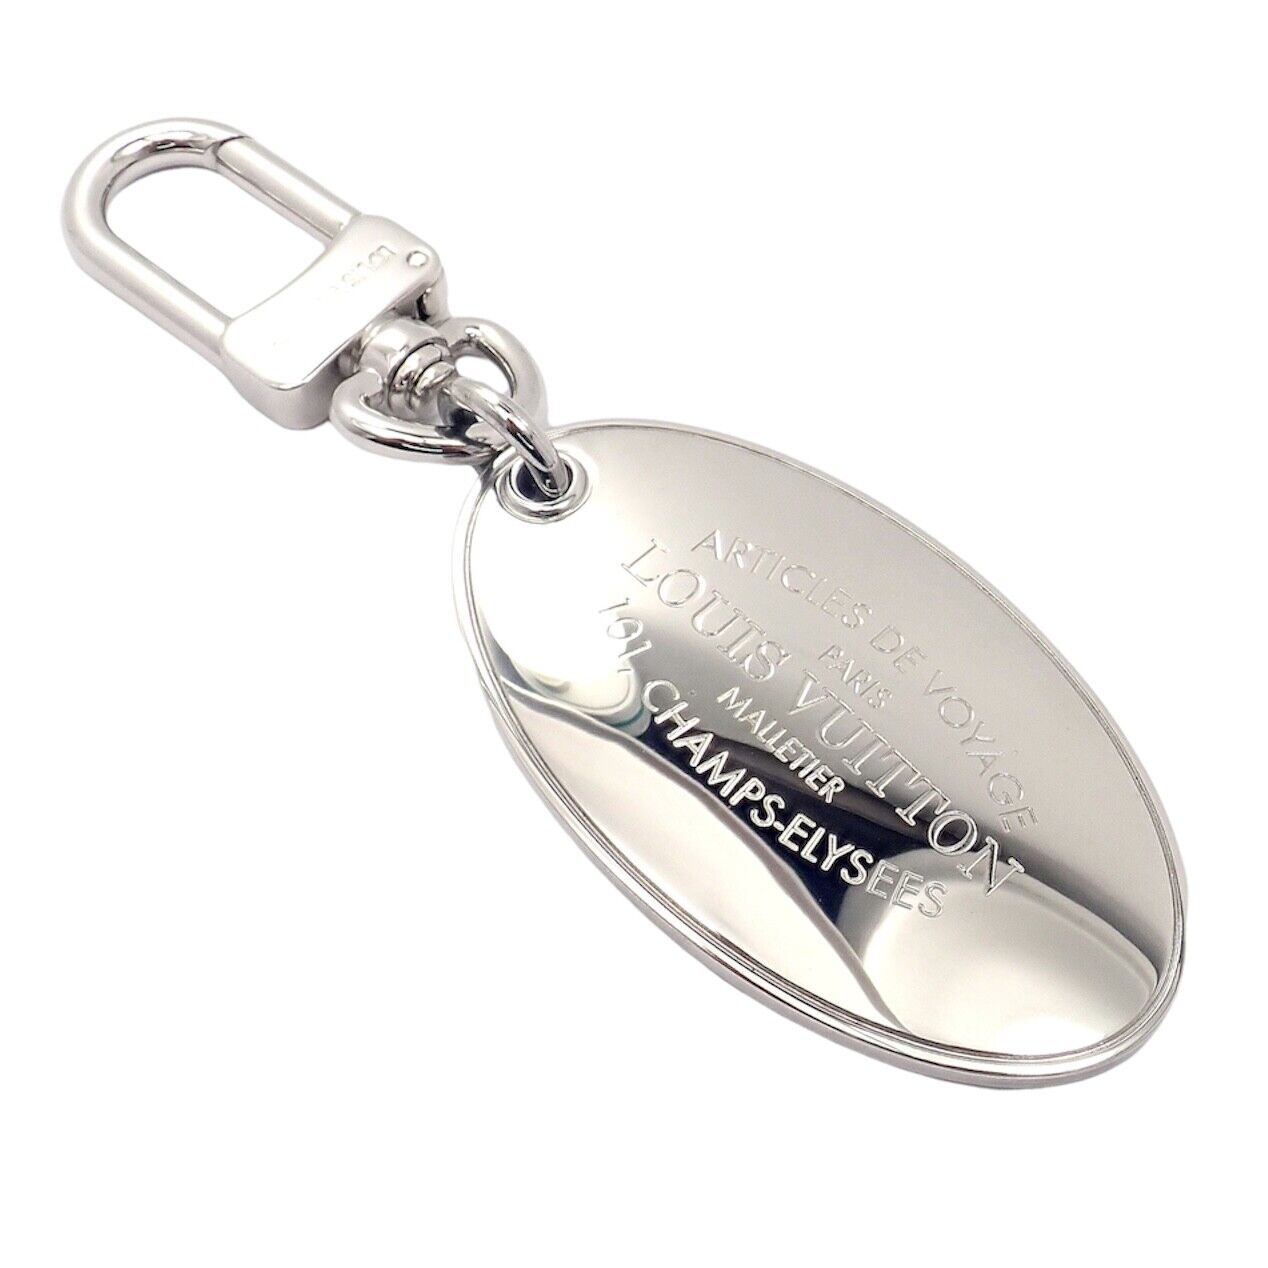 Louis Vuitton Clothing, Shoes & Accessories:Women:Women's Accessories:Key Chains, Rings & Finders Authentic Louis Vuitton LV Large Stainless Steel Luggage Tag Key Chain CK 1100